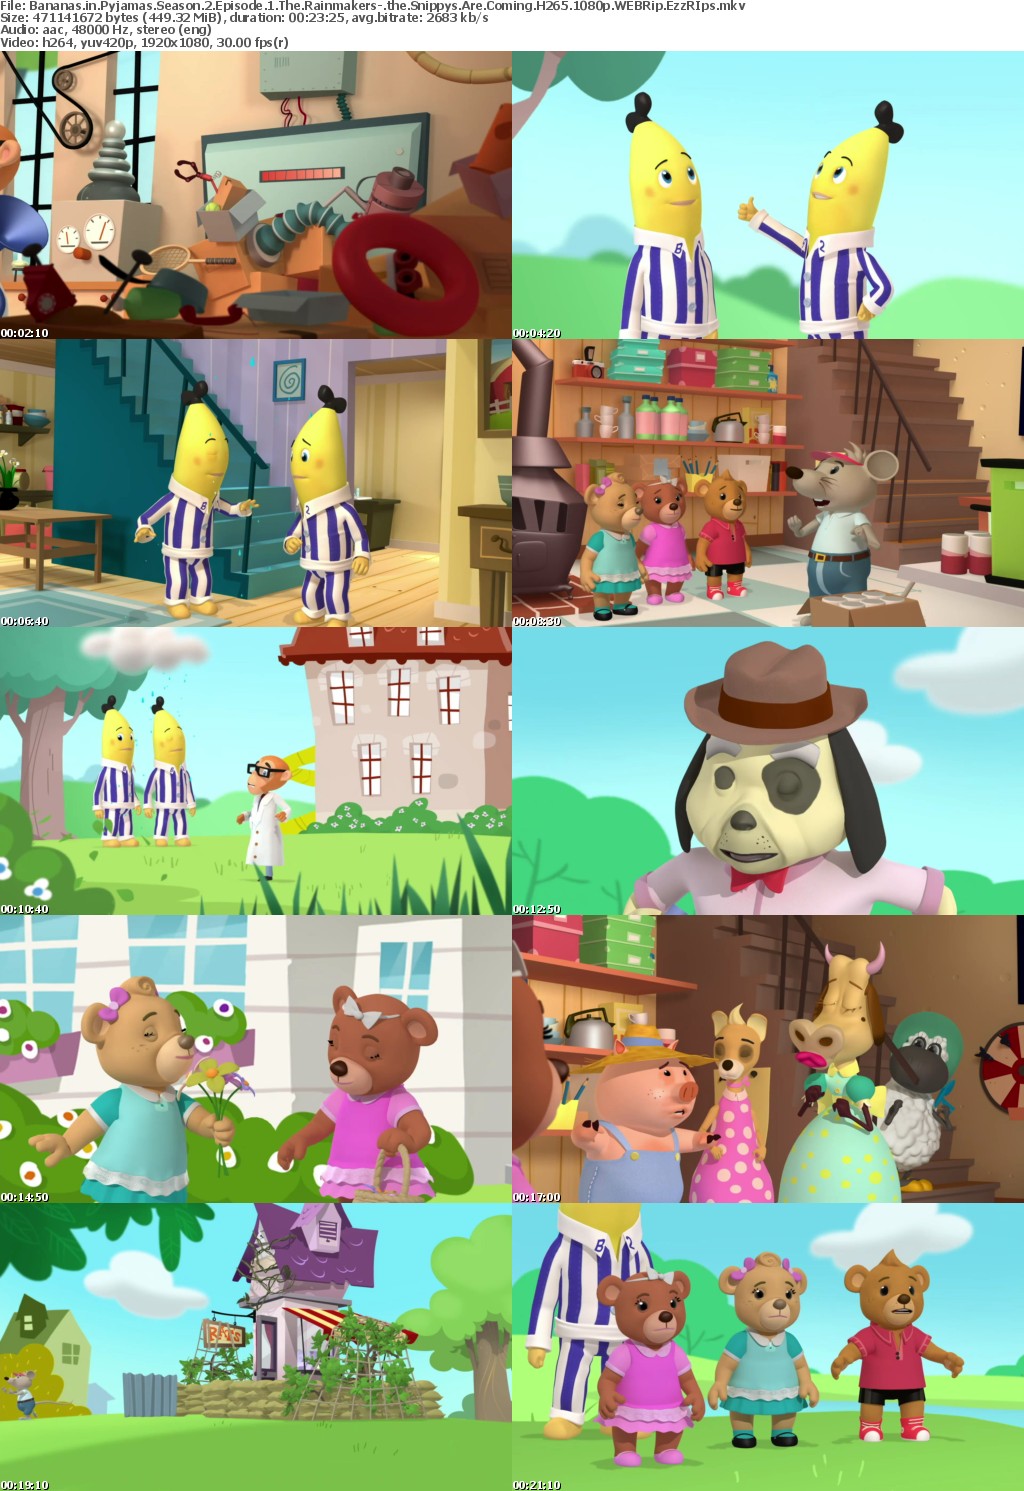 Bananas in Pyjamas Season 2 Episode 1 The Rainmakers-The Snippys Are Coming H265 1080p WEBRip EzzRips